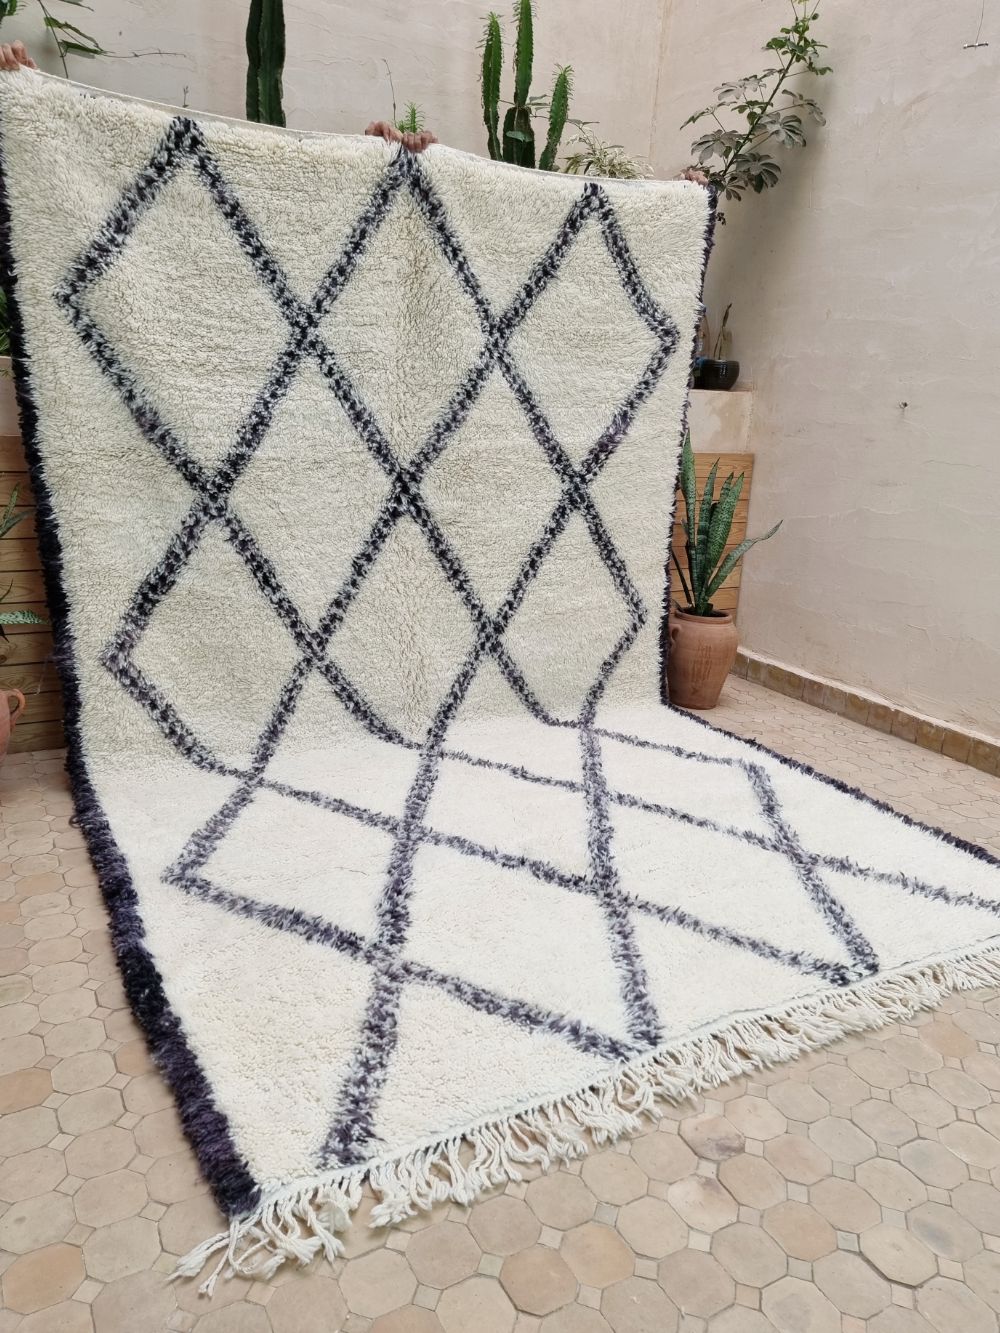 Order by Size: Moroccan Marmoucha Rug